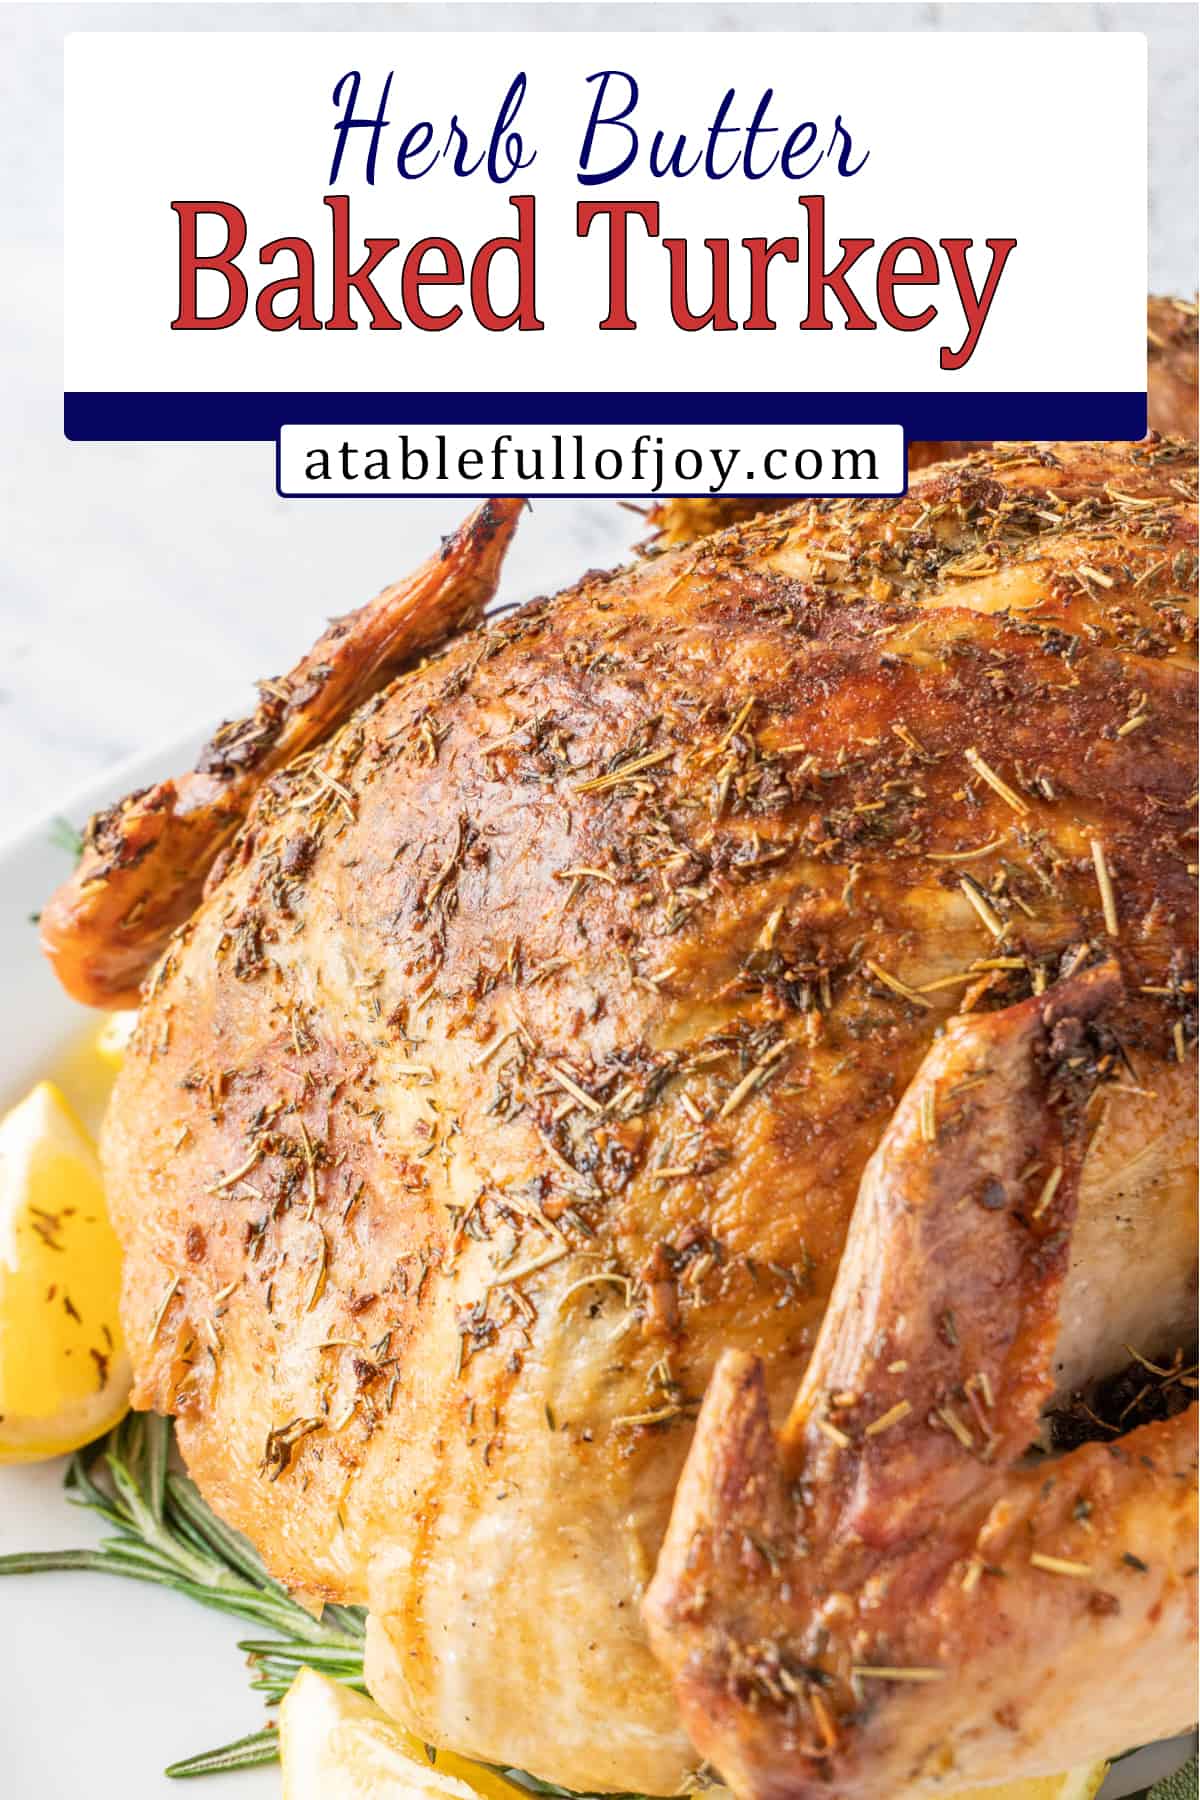 baked turkey on platter with lemon and sage leaves around it pinterest pin